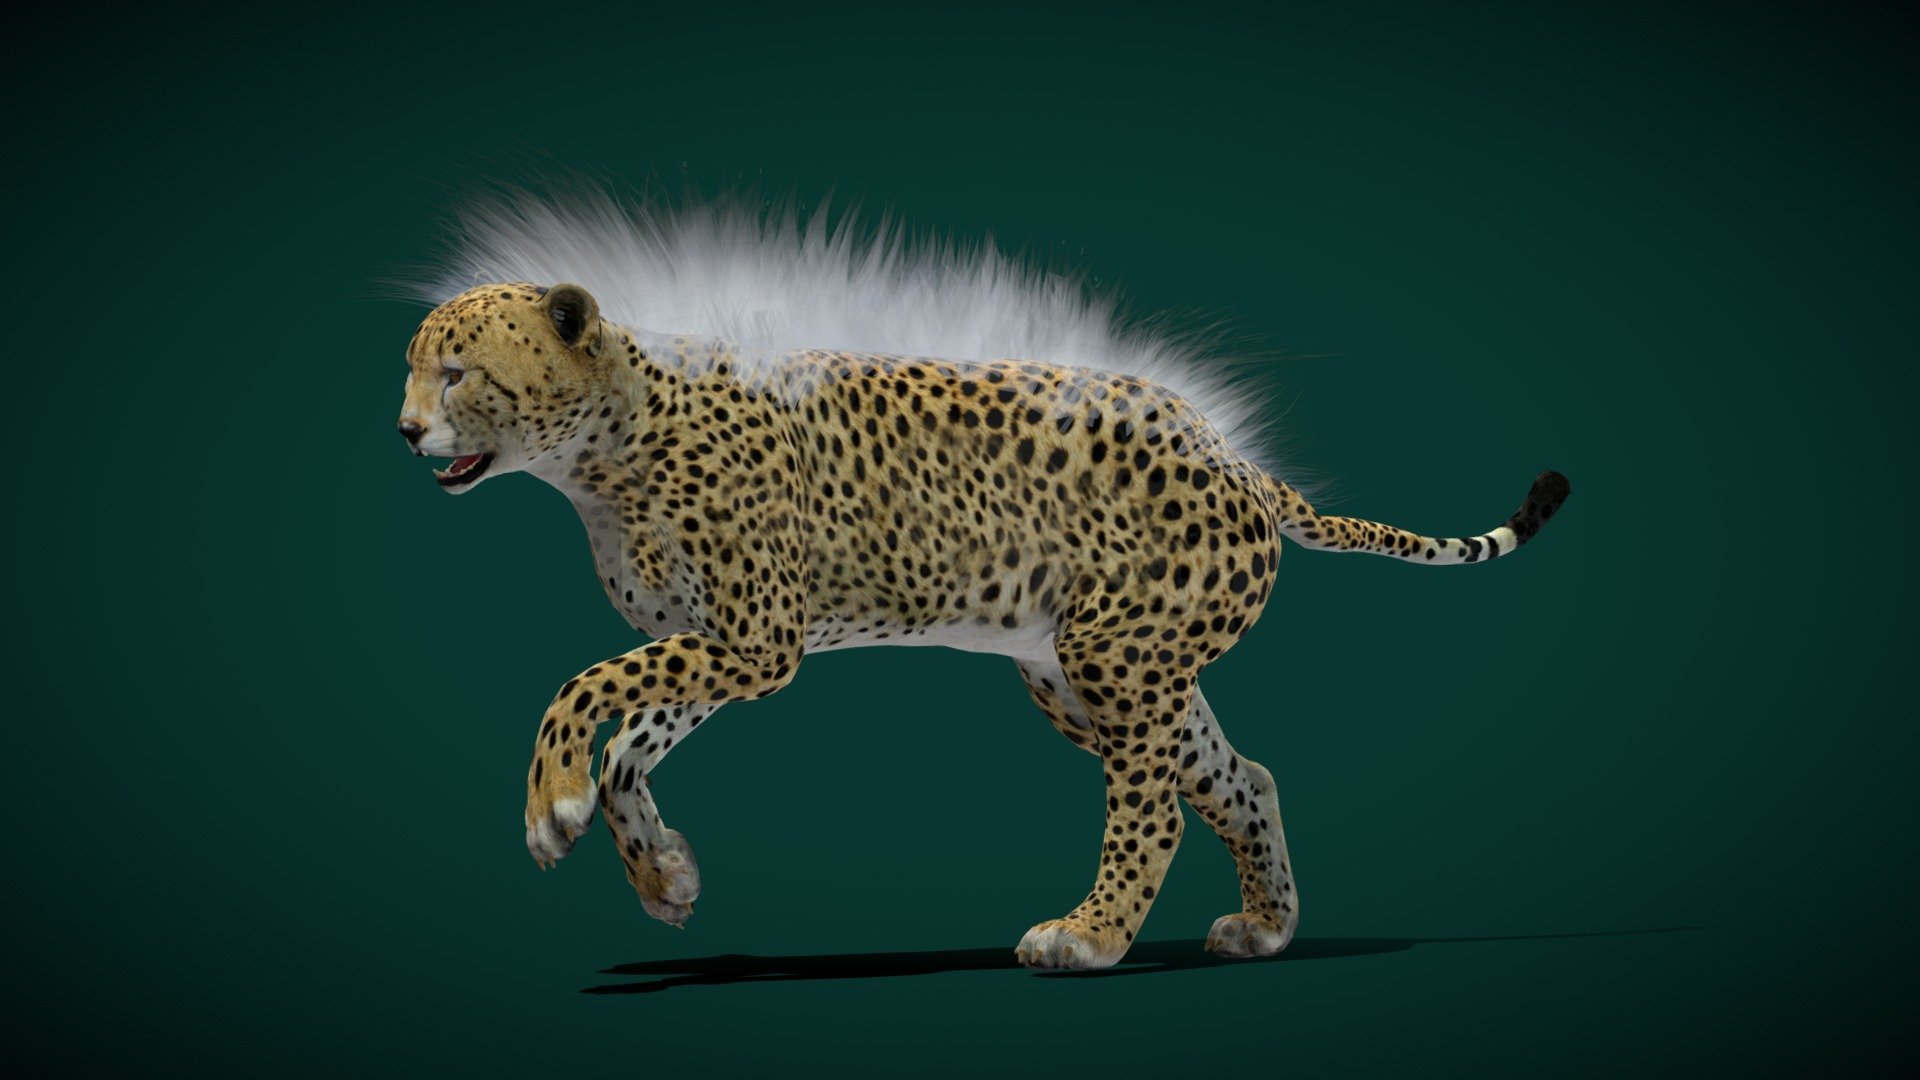 Young Cheetah Cat  (Large cat)  Animalia

Acinonyx jubatus Animal Mammal ( tawny to creamy white) Carnivora ,Felidae

1 Draw Calls

-

Game Ready Asset

Subdivision Surface Ready

9 Animations

4K PBR Textures Materials

Unreal FBX (Unreal 4,5 Plus)

Unity FBX

Blend File 3.6.5 LTS

USDZ File (AR Ready). Real Scale Dimension (Xcode ,Reality Composer, Keynote Ready)

Textures Files

GLB File (Unreal 5.1 Plus Native Support)


Gltf File ( Spark AR, Lens Studio(SnapChat) , Effector(Tiktok) , Spline, Play Canvas,Omiverse )




Triangles -35546



Faces -35026

Edges -65511

Vertices -33036

Diffuse, Metallic, Roughness , Normal Map ,Specular Map,AO
The cheetah is a large cat with a tawny to creamy white or pale buff fur that is marked with evenly spaced, solid black spots. Its head is small and rounded, with a short snout and black tear-like facial streaks. It reaches 67–94 cm at the shoulder, and the head-and-body length is between 1.1 and 1.5 m 3d model